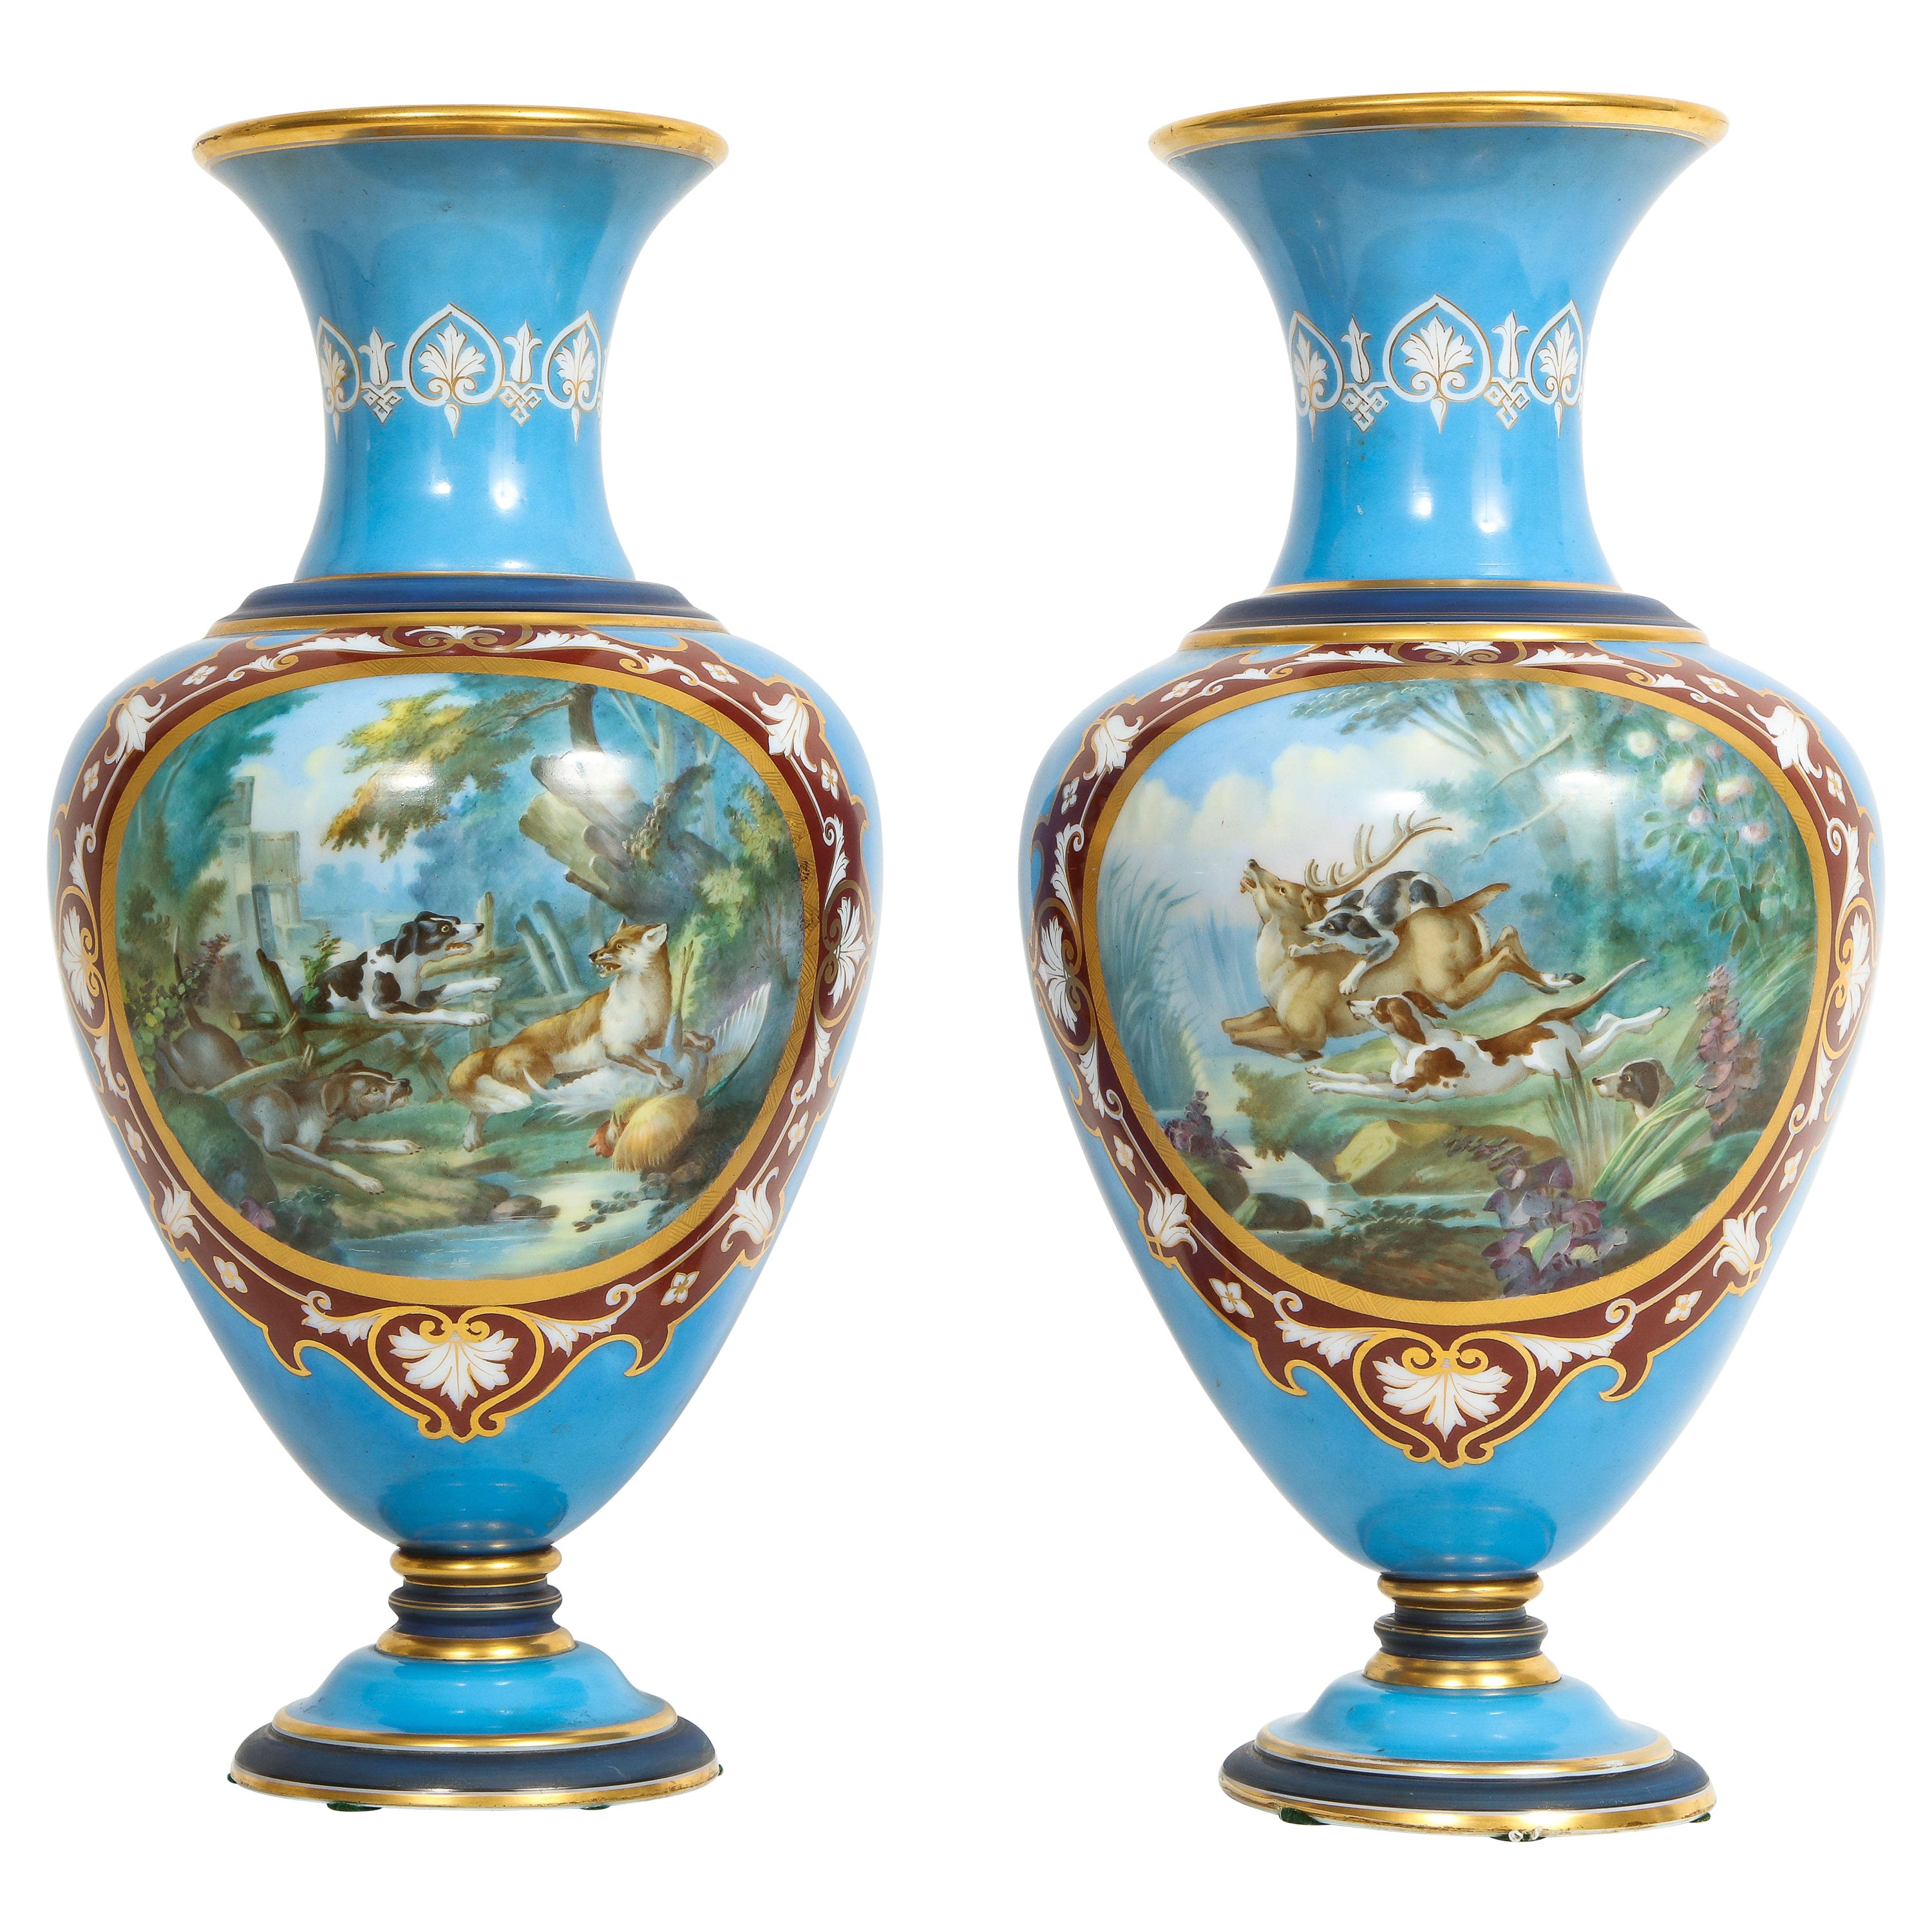 19th Century French Pair of Baccarat Enameled Opaline Vases with Hunting Scenes For Sale